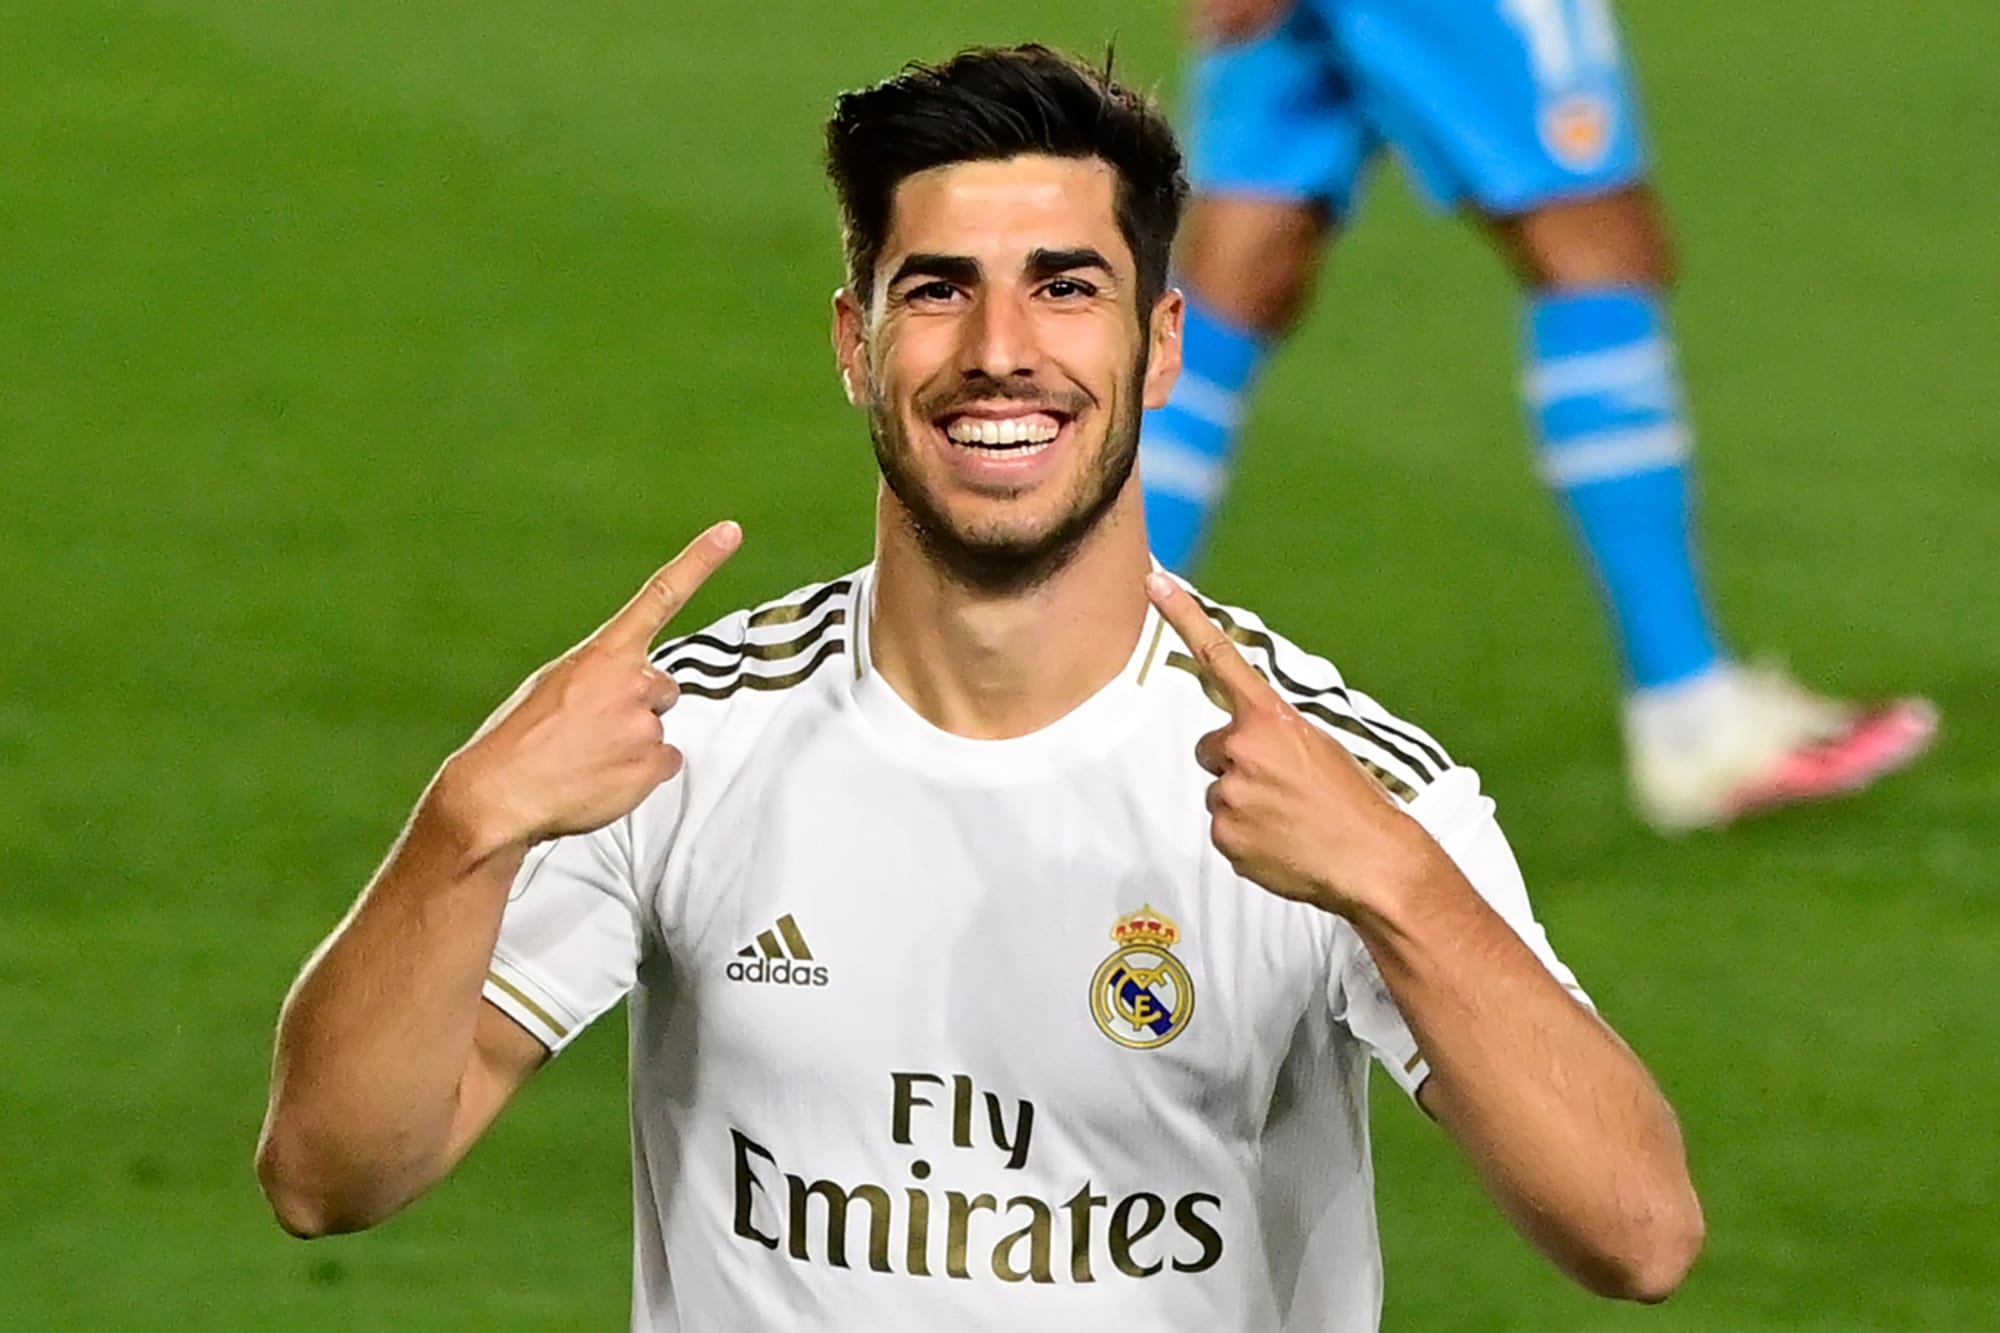 Real Madrid: Marco Asensio is back and better than ever